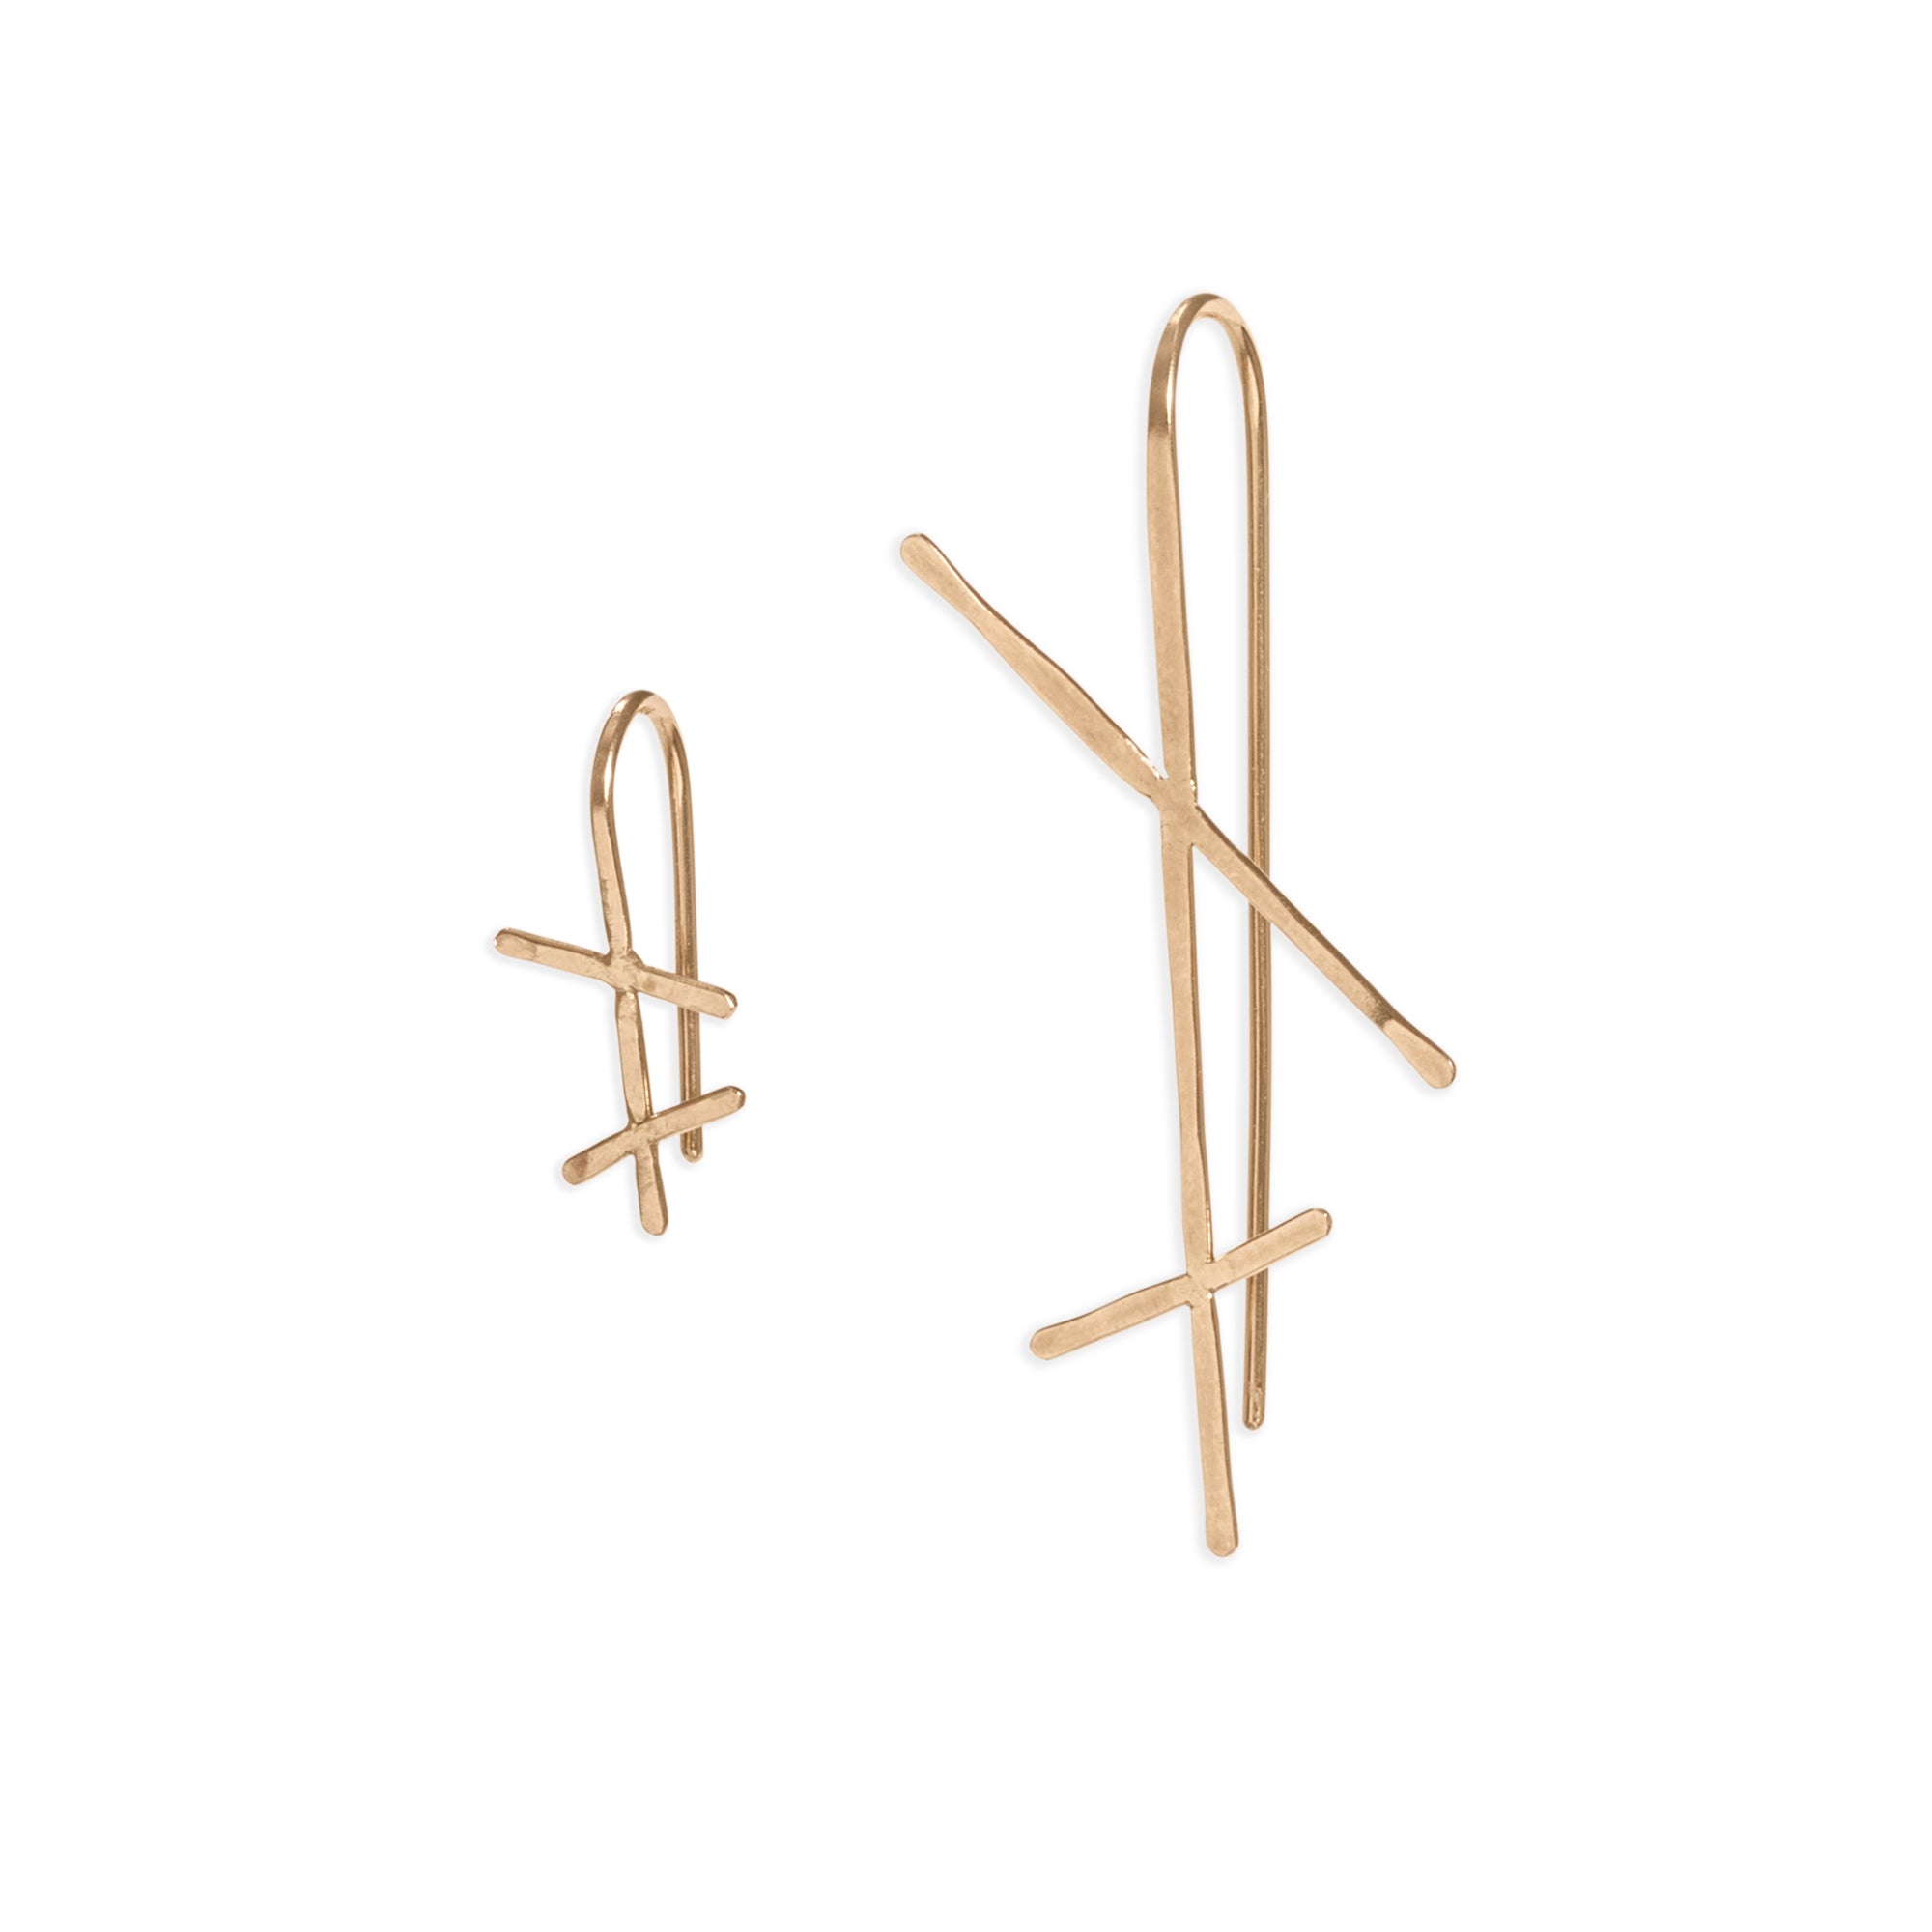 Chaos hook, modern hook earrings made from 14k gold, featuring a hammered wire drop with two intersecting bars.